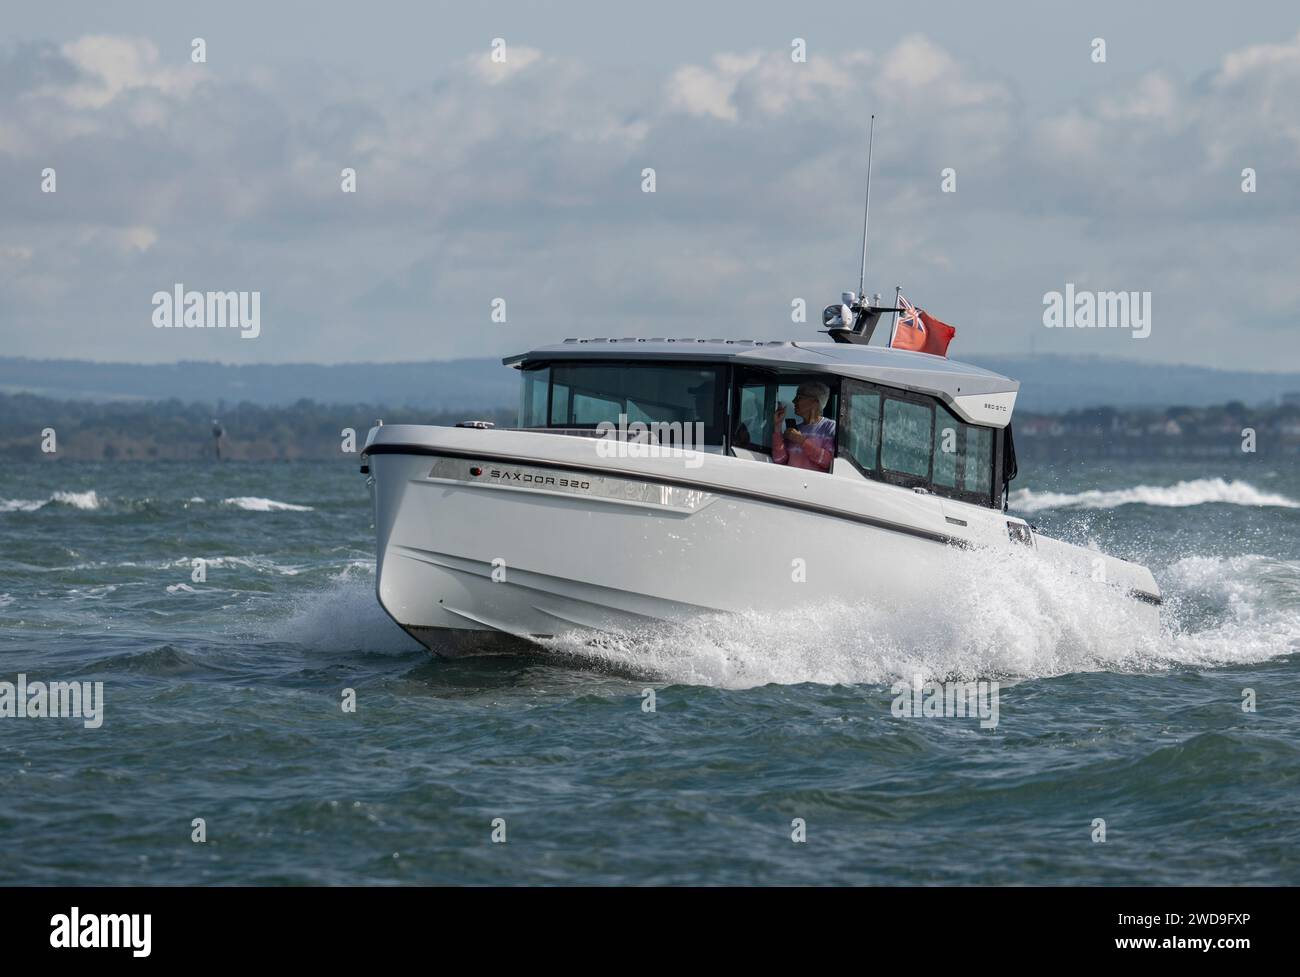 Smart Saxdor 320 GTC speedboat making rapid progress along the Solent during the Cowes Power Boat Race Stock Photo